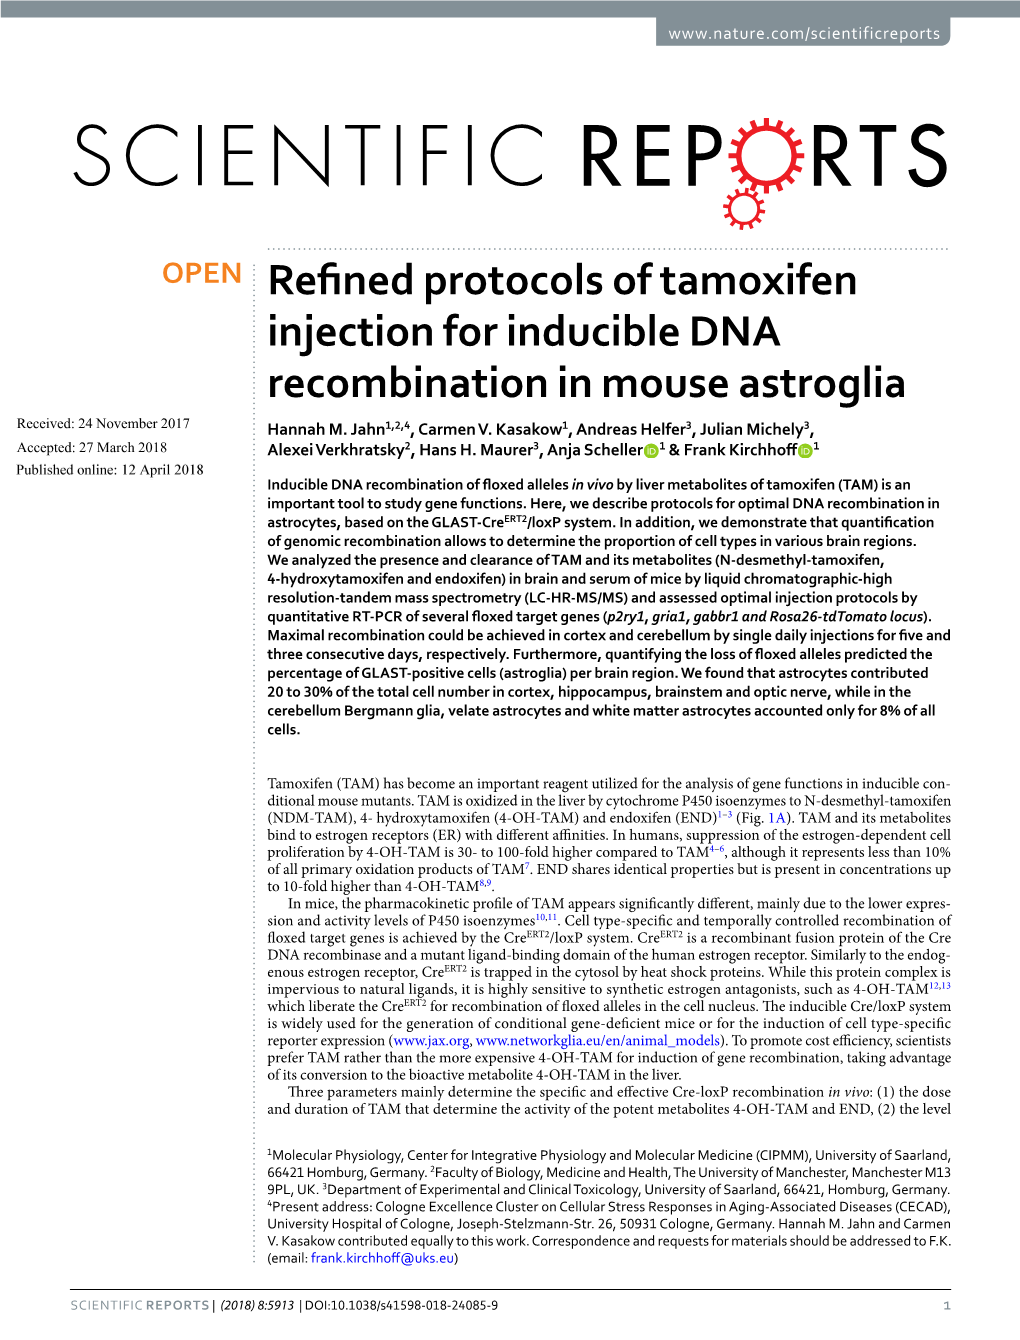 Refined Protocols of Tamoxifen Injection for Inducible DNA